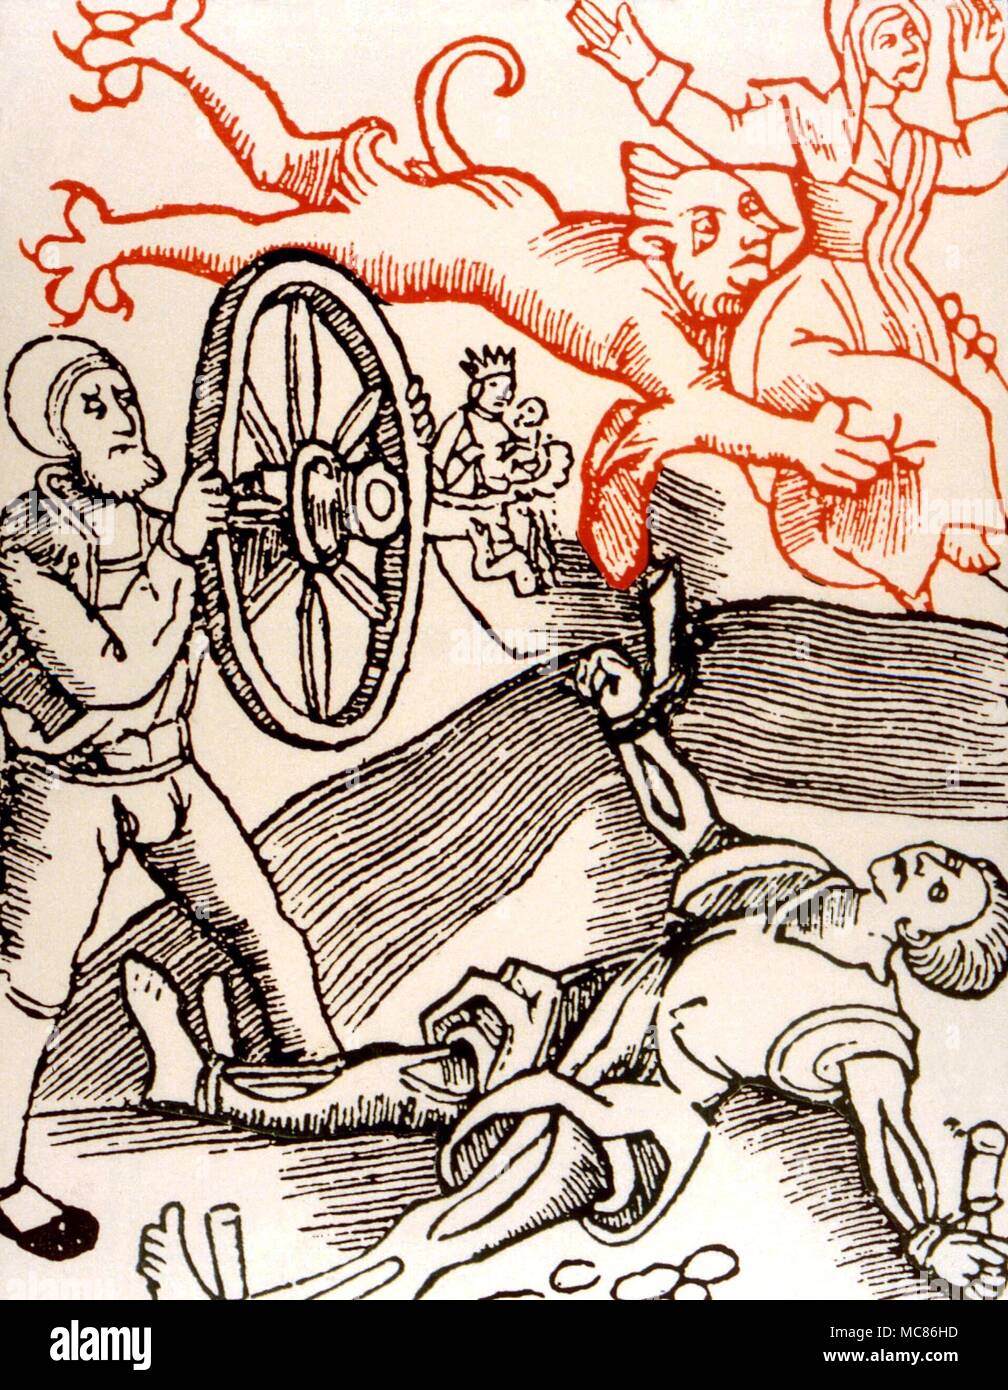 Torture - Breaking on the Wheel Breaking limbs on wheel, and braiding limbs into the spokes. After a woodcut from Hans Stumpt's 'Schweizer-chronik', 1548 Stock Photo